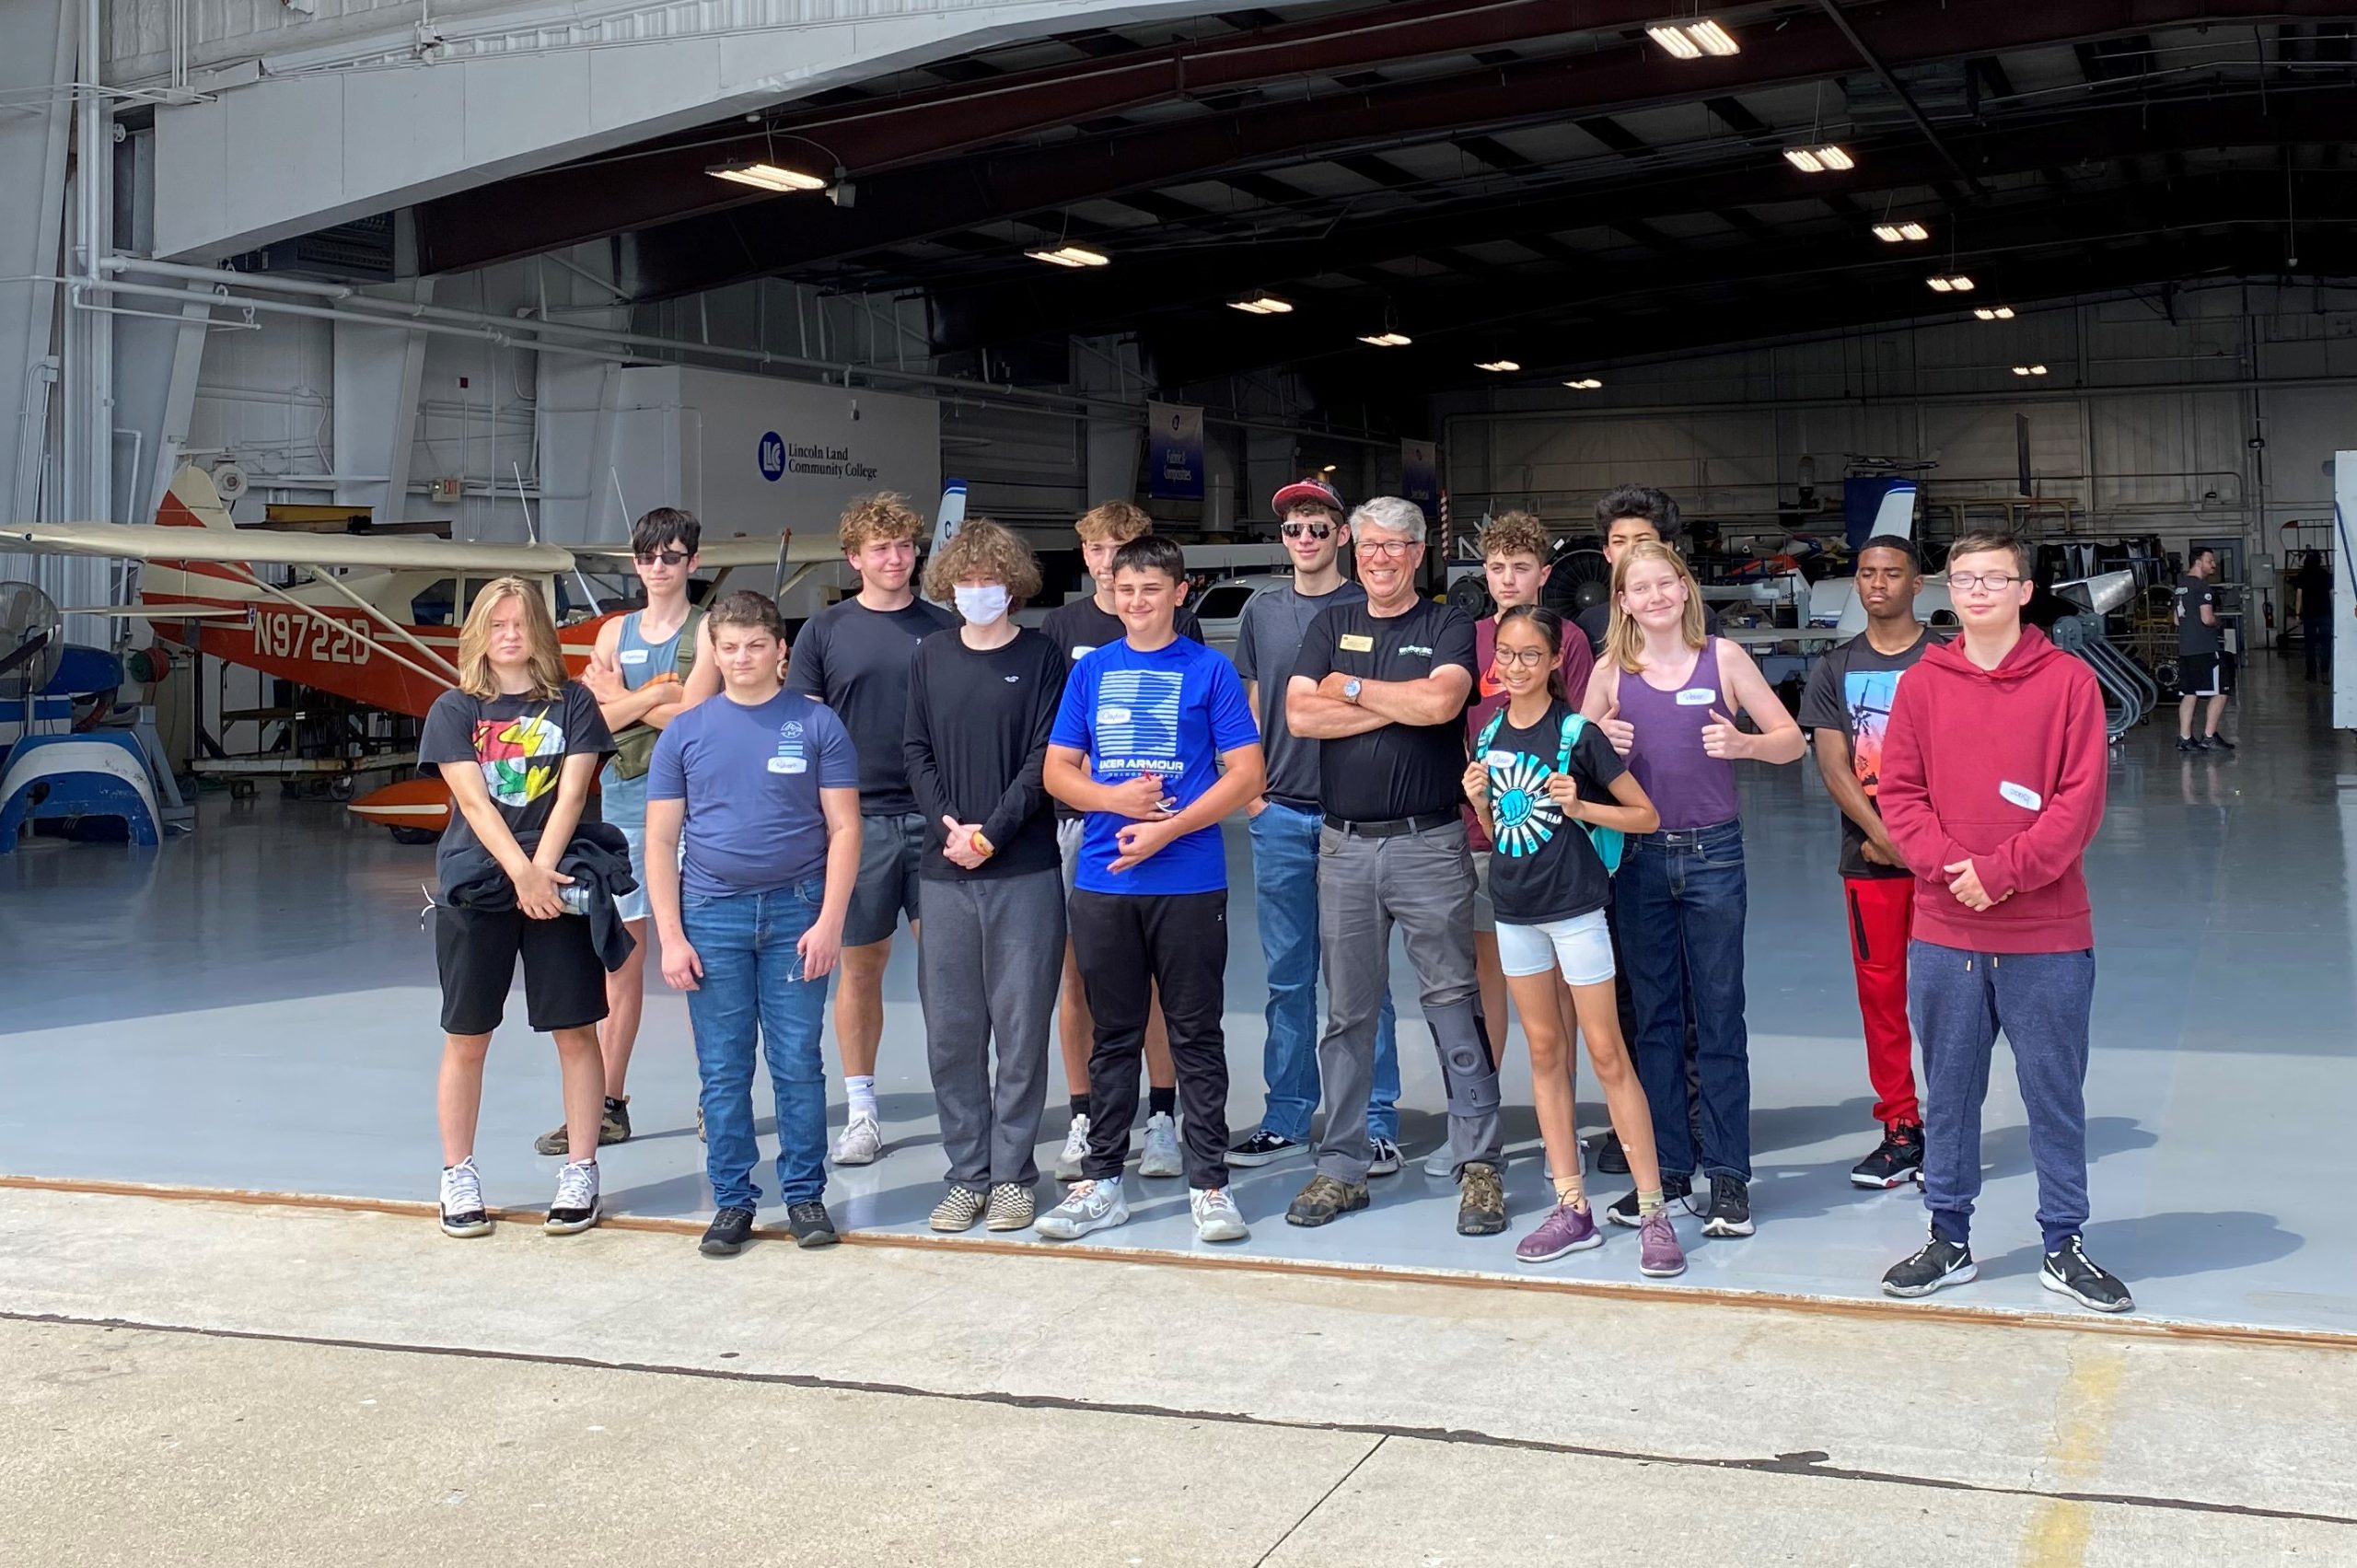 Teen Learning Lab participants pictured with Dave Pietrzak at the opening of the hangar by the tarmac